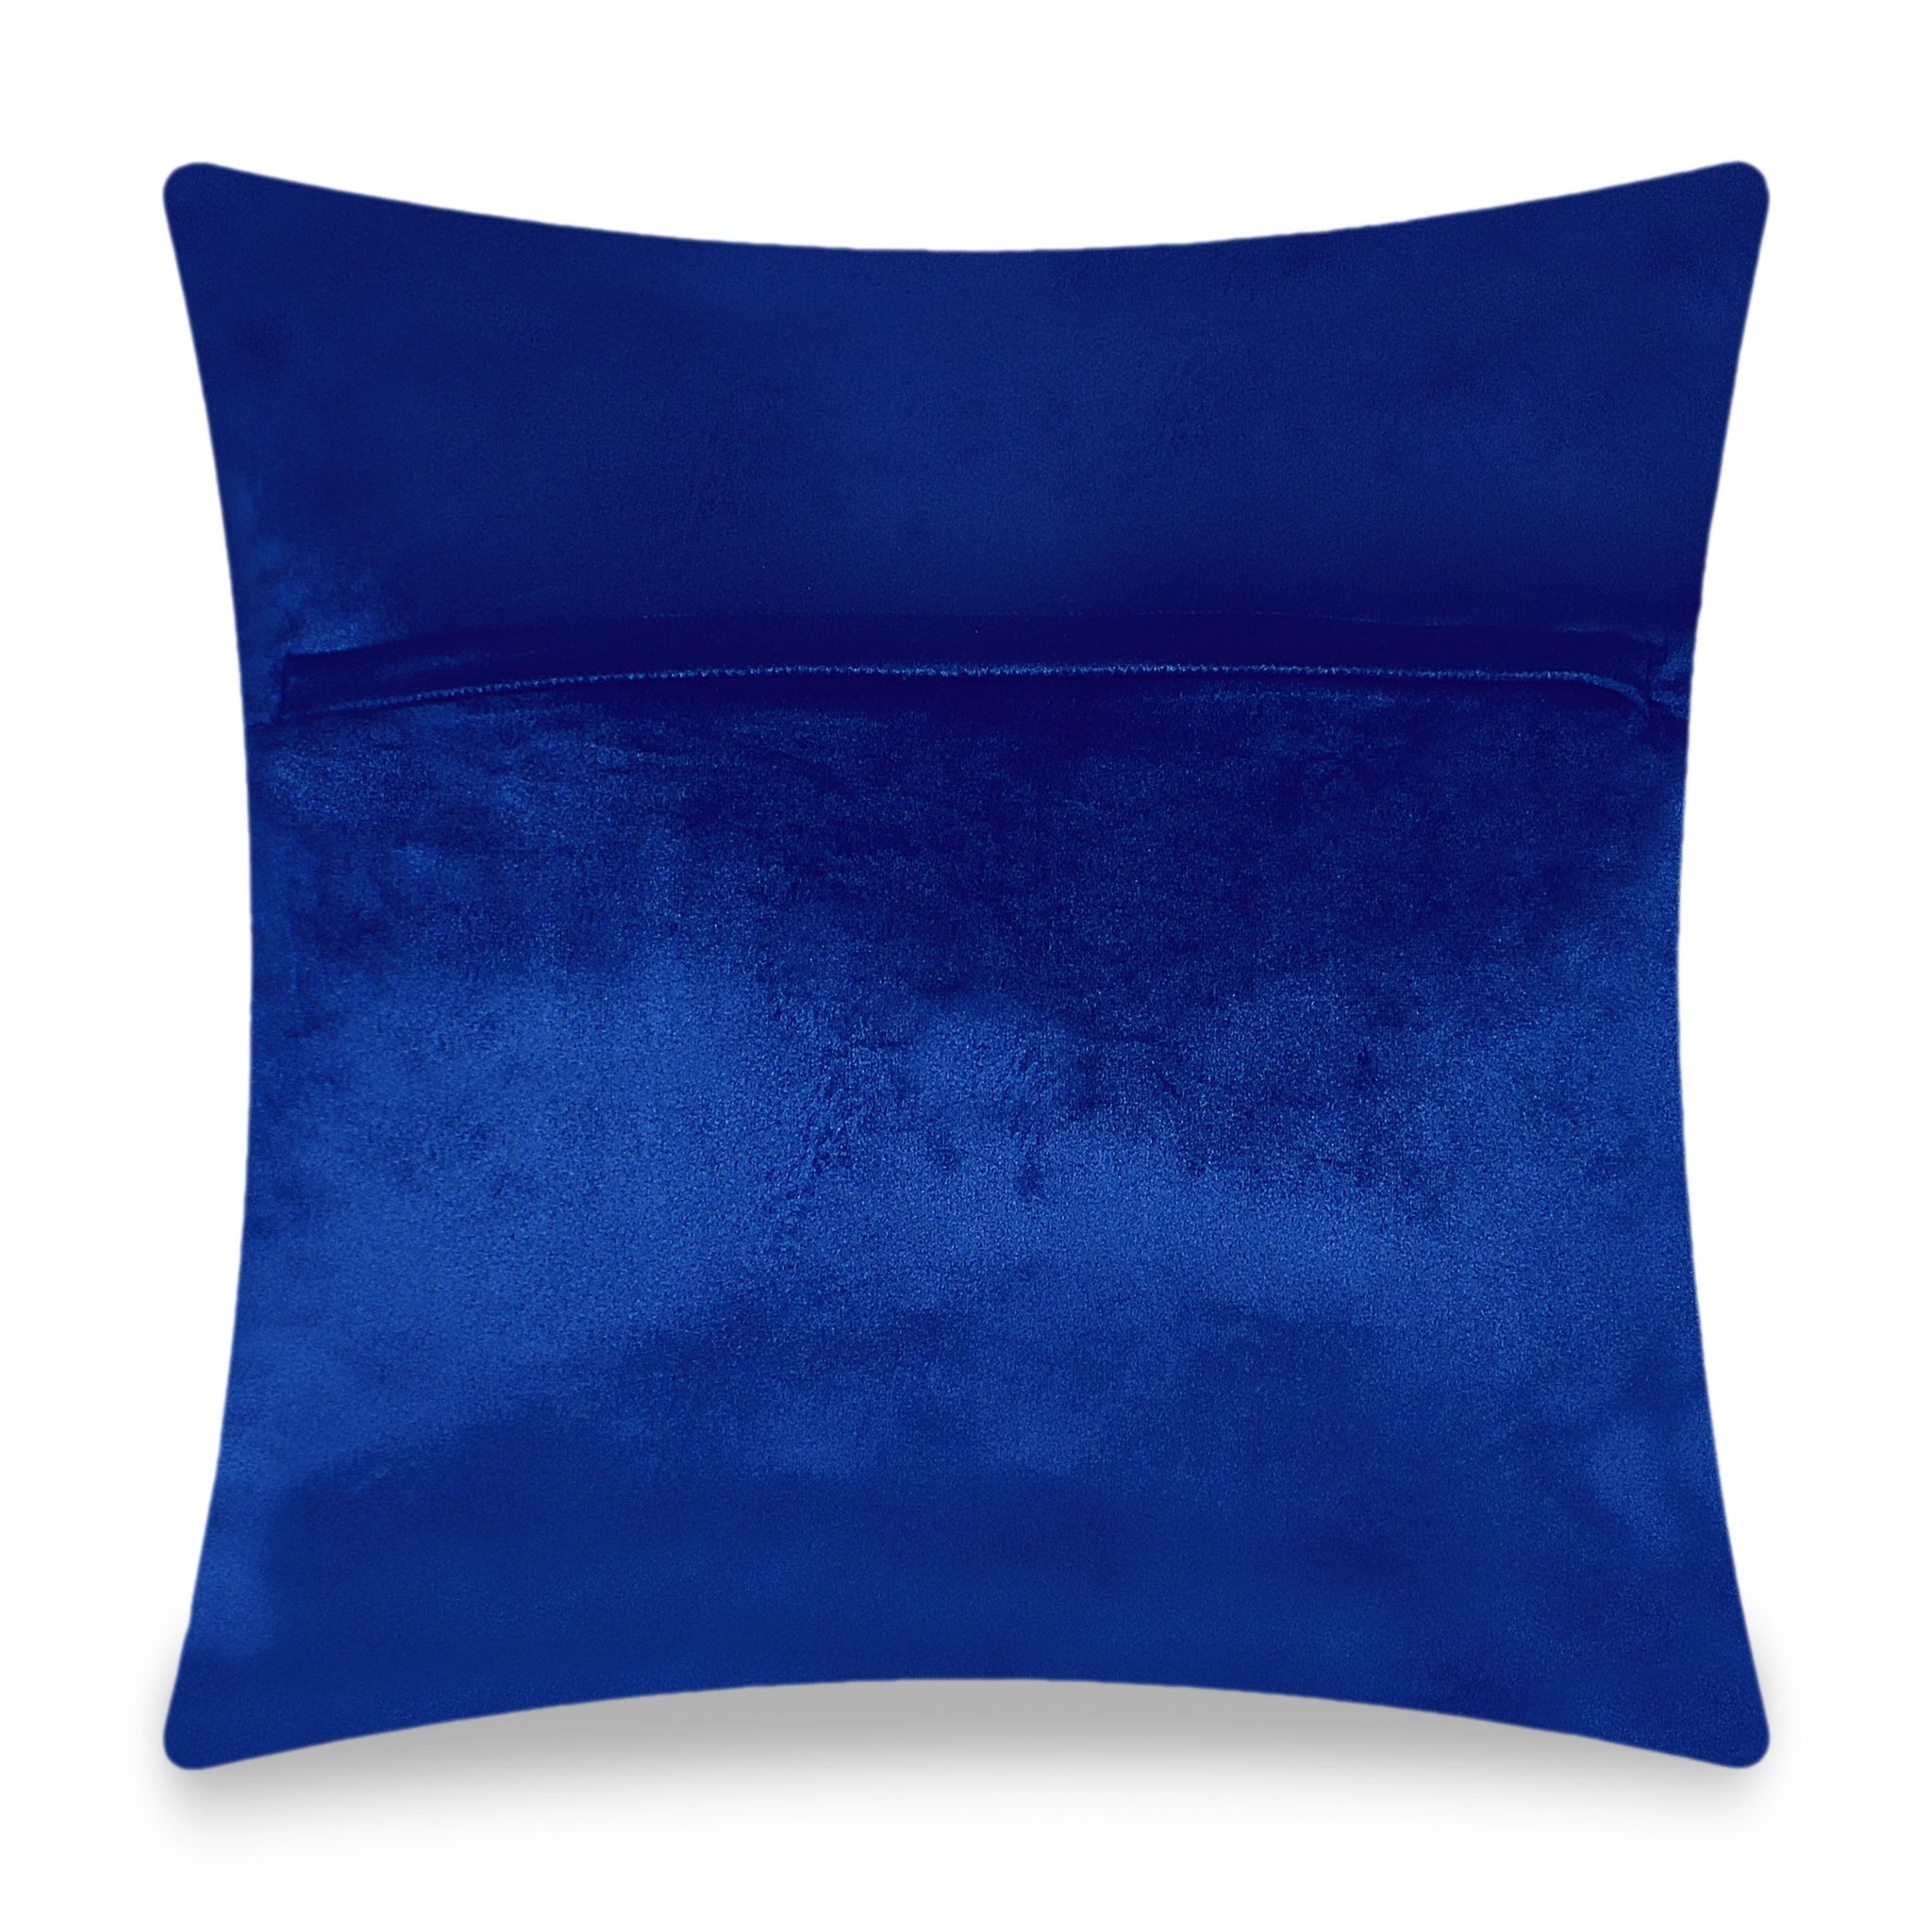 Blue Velvet Cushion Cover Modern Geometric Embroidery Decorative Pillow Home Decor Throw Pillow for Sofa Chair Living Room 45x45 cm 18x18 In